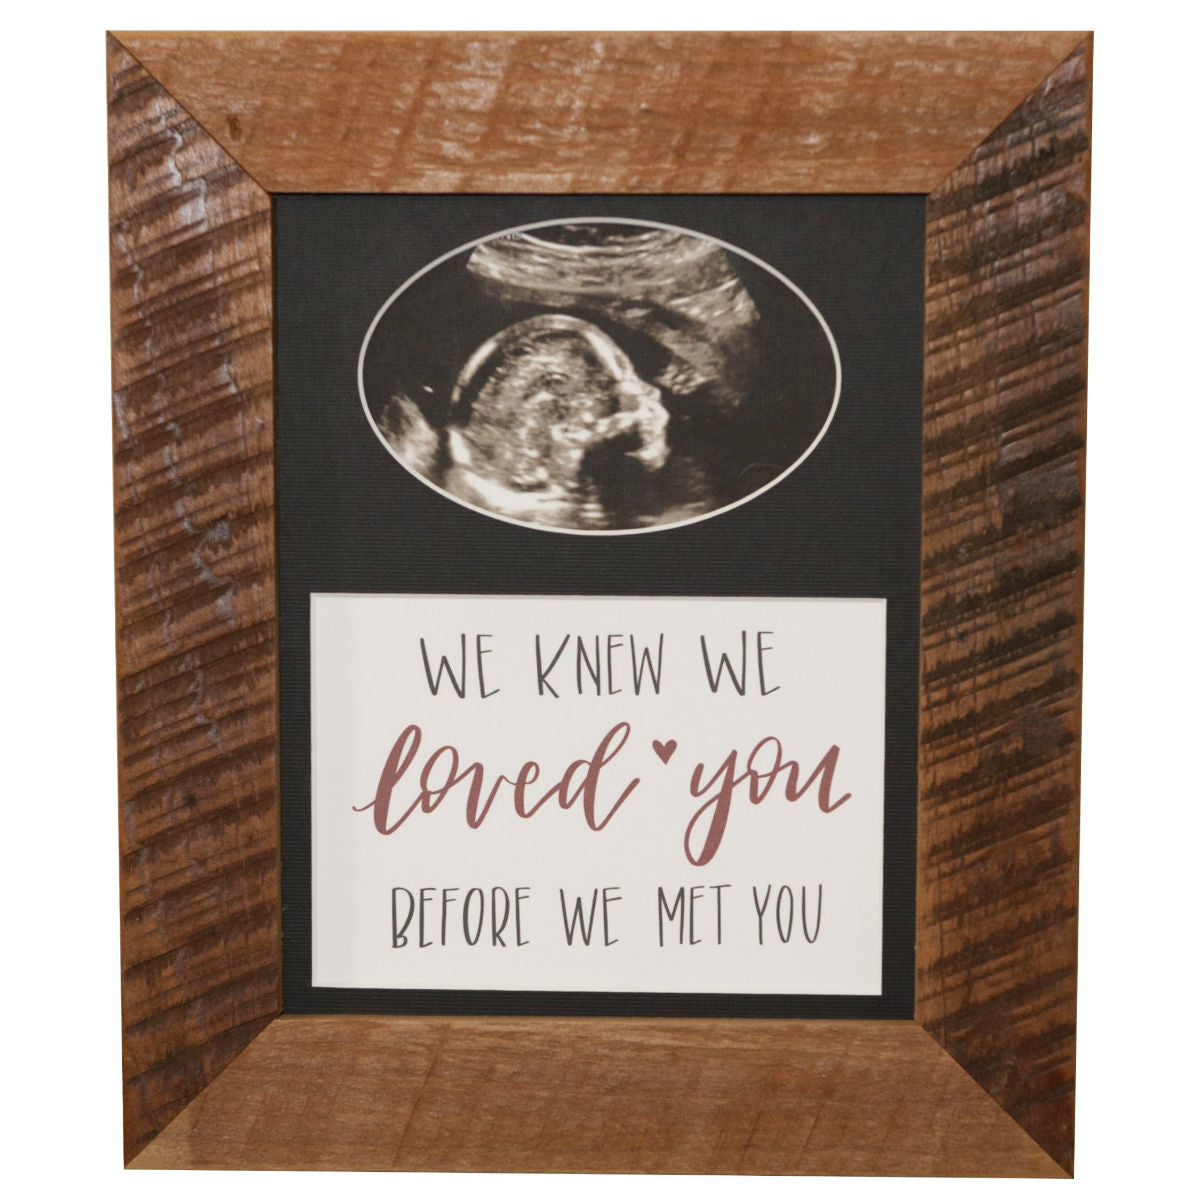 "We Knew We Loved You Before We Met You" Ultrasound Picture Frame with Black Mat, 8x10 - Rustic Red Door Co.